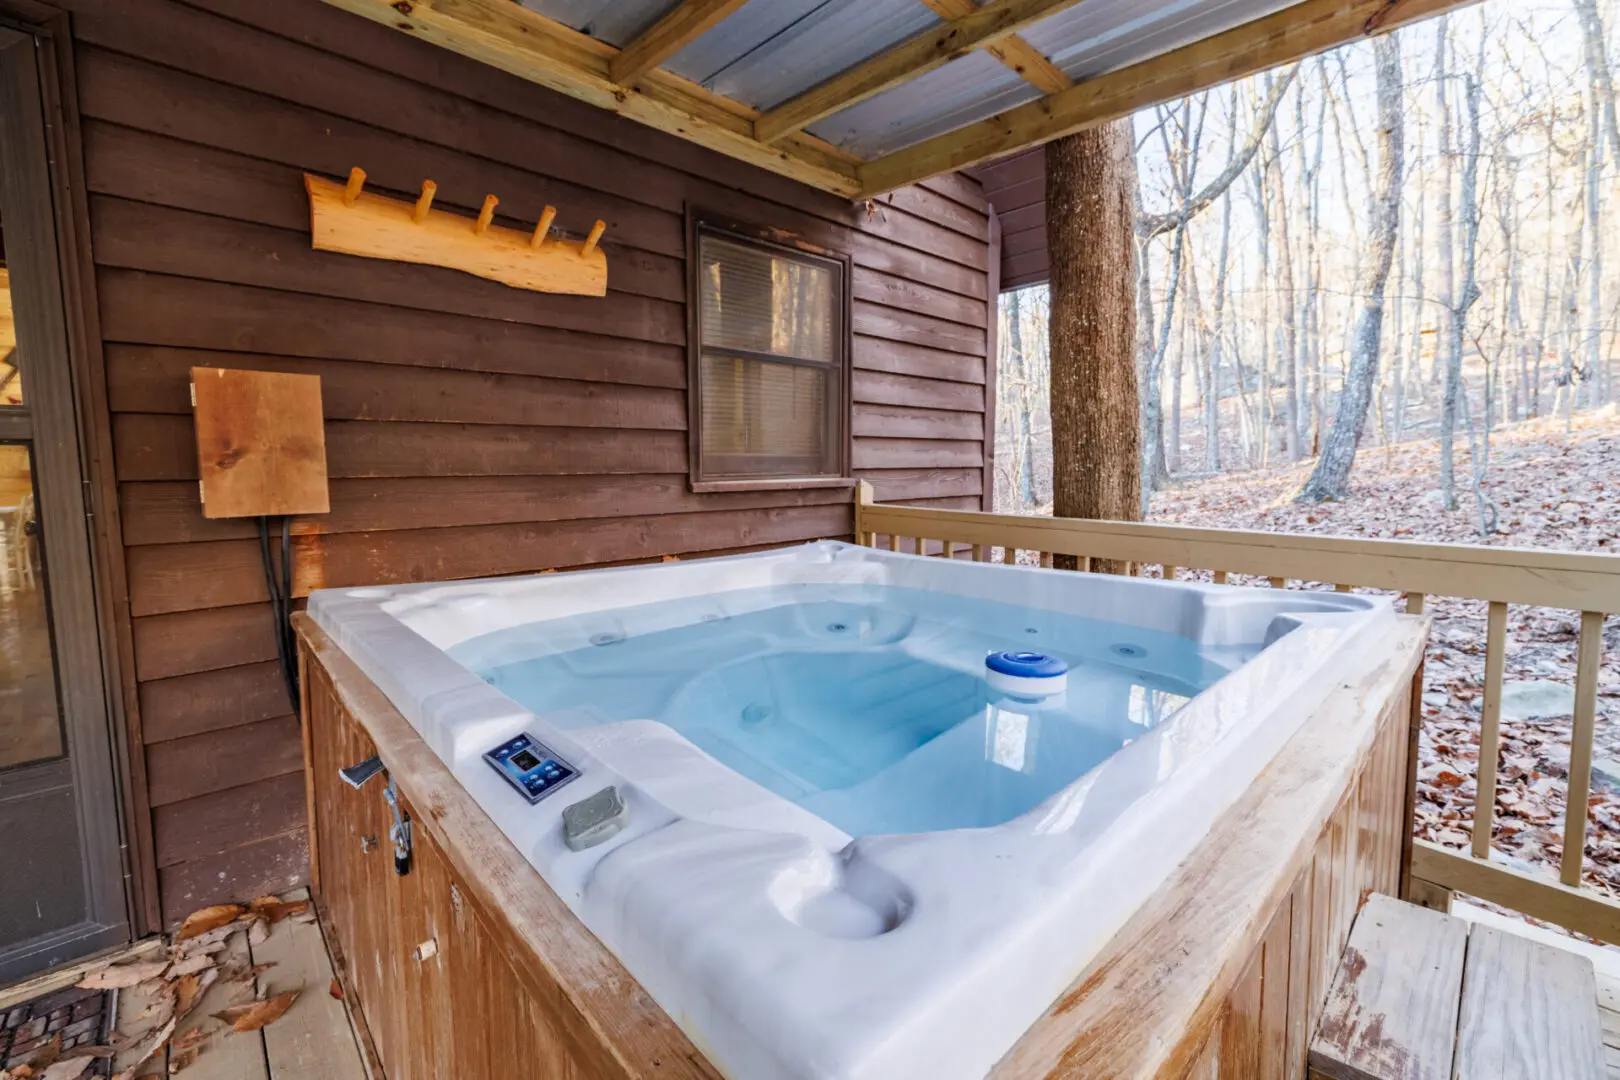 A relaxing hot tub on the deck of a vacation cabin.